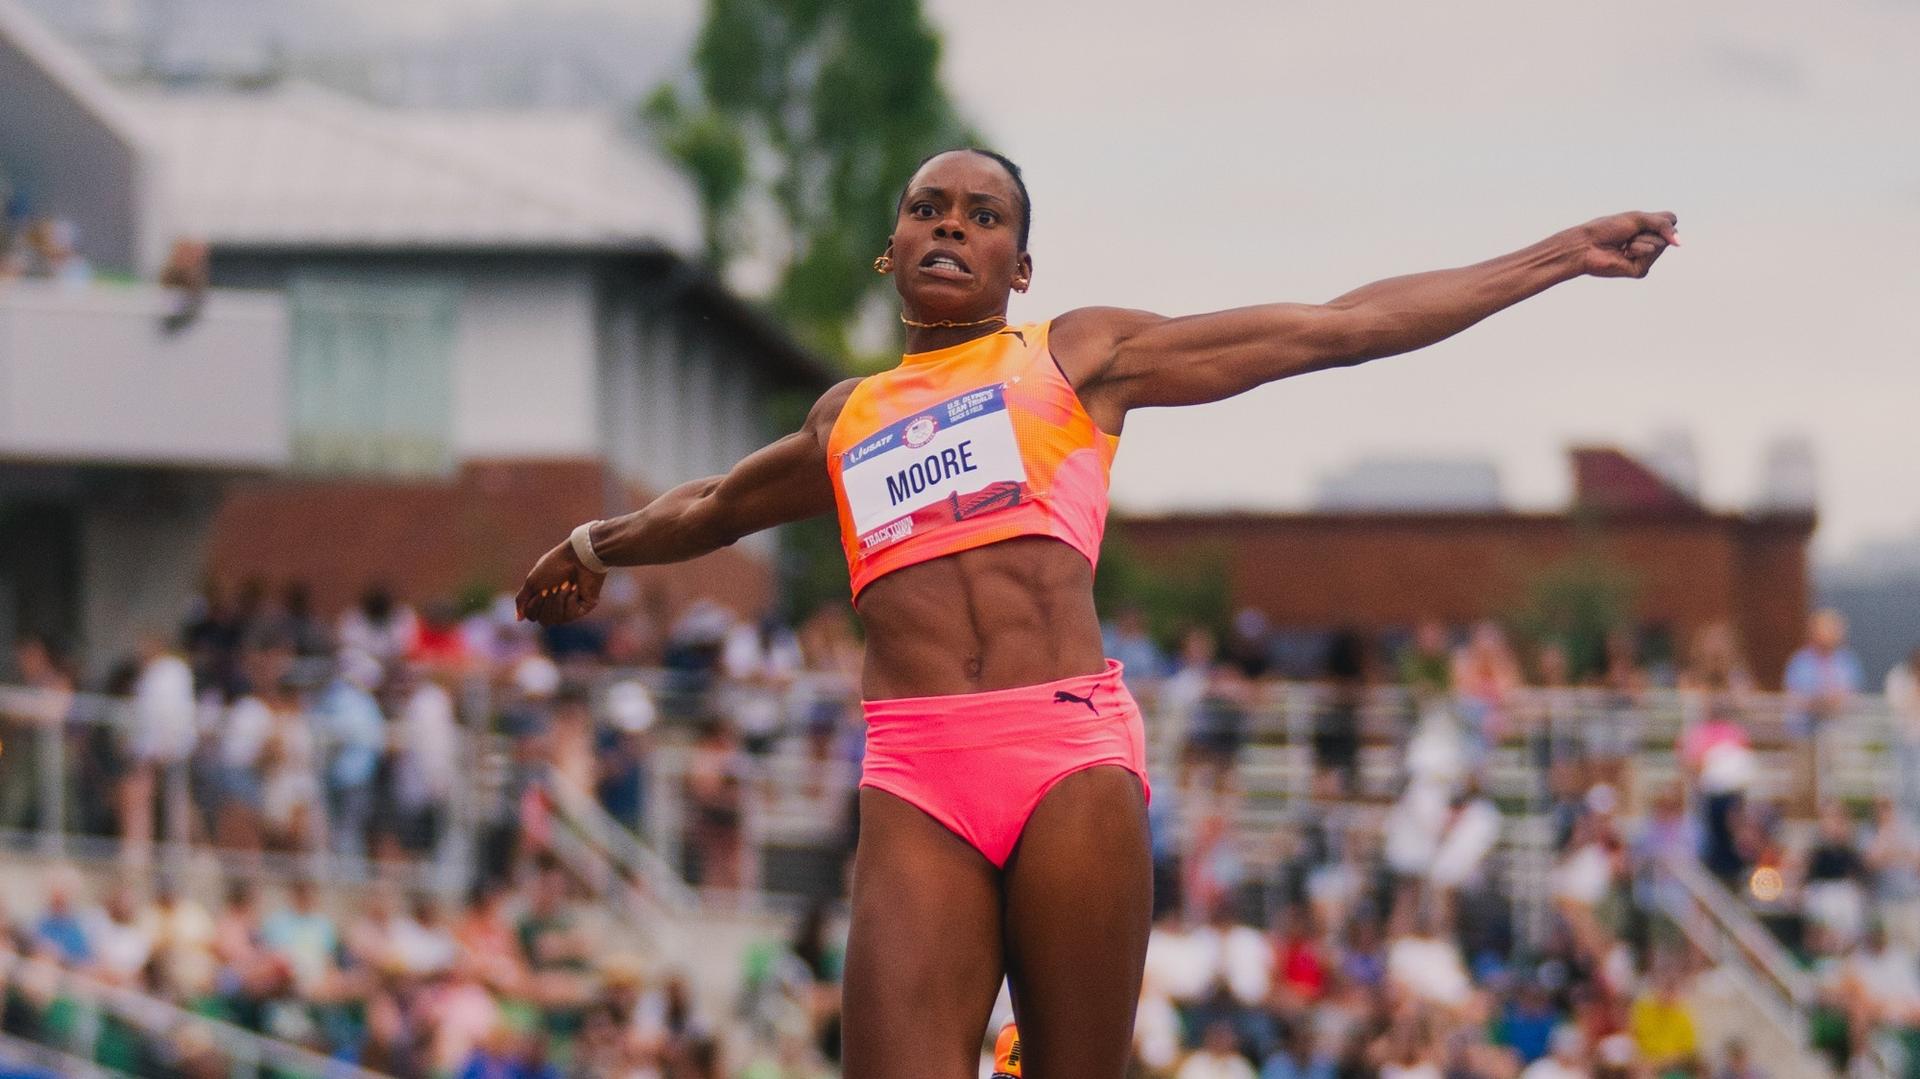 Jasmine Moore Earns Spot on Olympic Roster in Long Jump, Valby Finishes Runner-Up in 10k